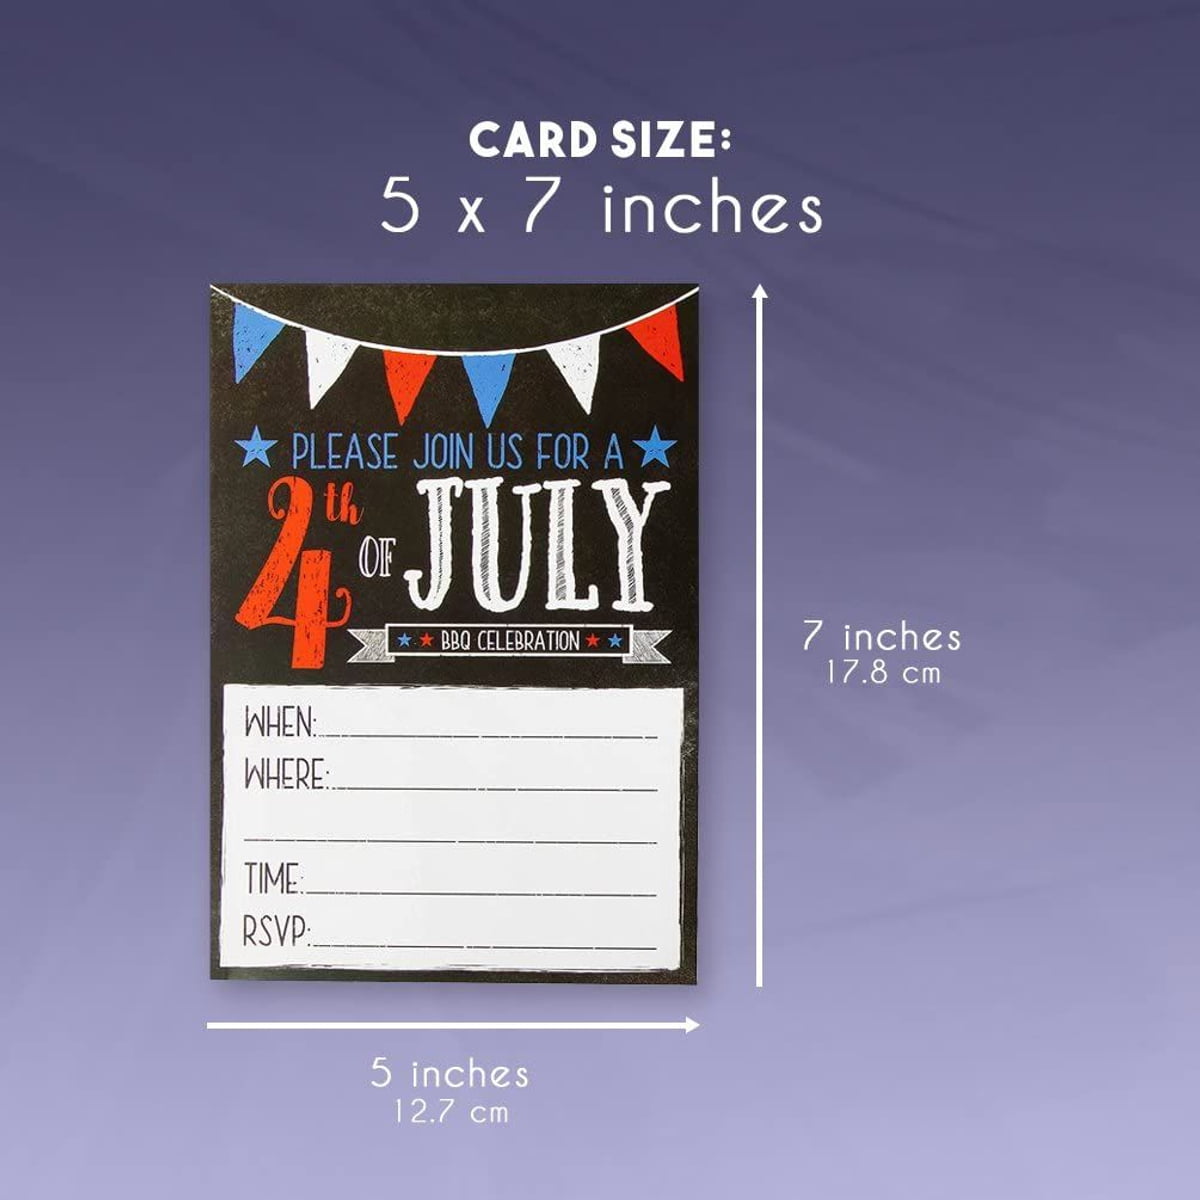 Family Reunion Envelopes Included 5 x 7 Inches Ideal for Picnic 4th of July Invitations Patriotic Party Invitations BBQ Party Supplies 50-Pack BBQ Party Invitations Cards 